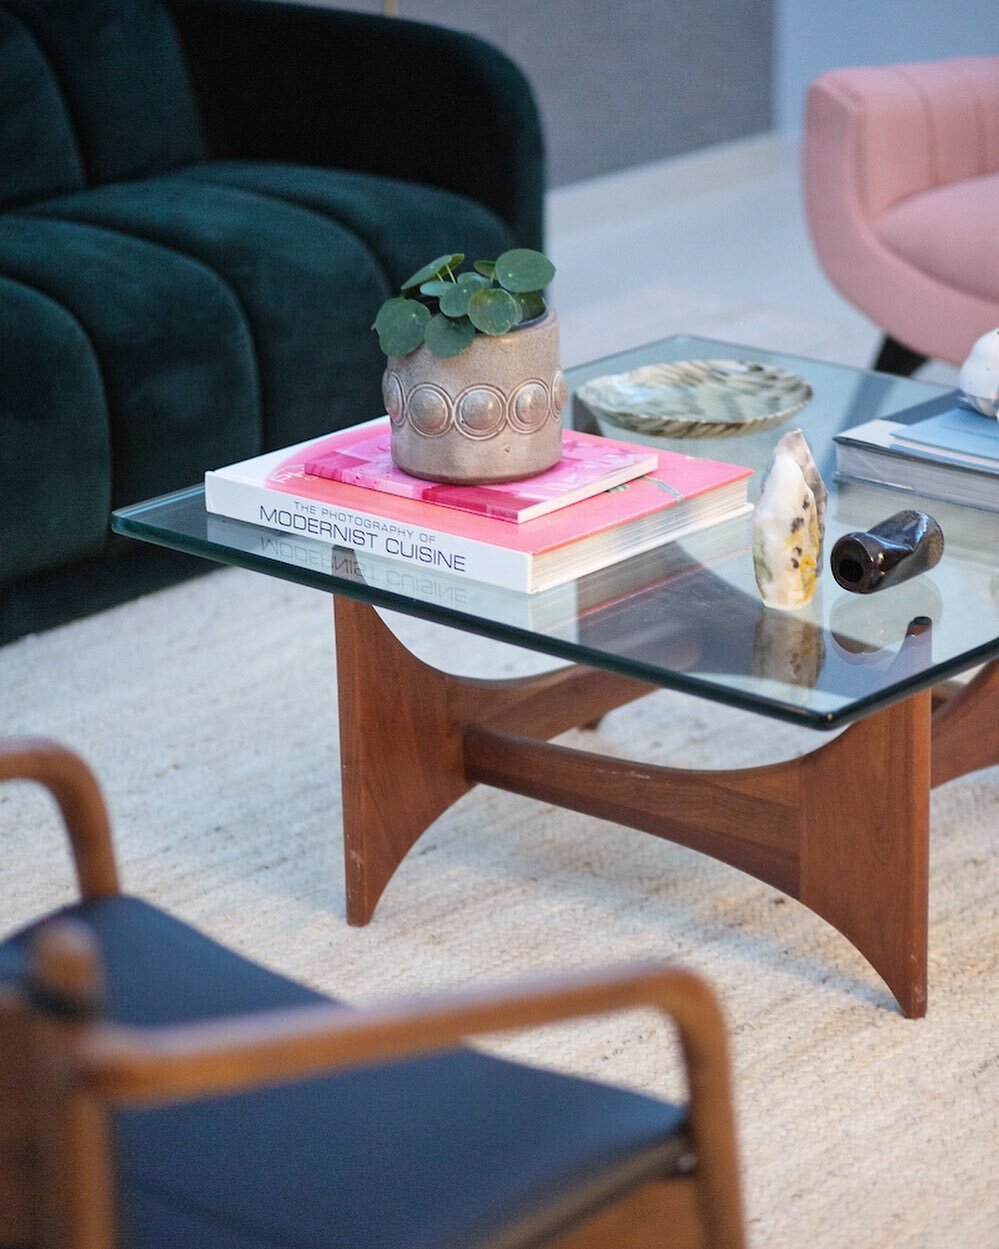 Each of our projects include unique vintage pieces. Seen here is a detail of sculptural Adrian Pearsall coffee table in our Camelia project.  Photo by Raquel Perez Puig @perezpuig]
&mdash;-
Interested in our design services? DM us today!
Local to DC?